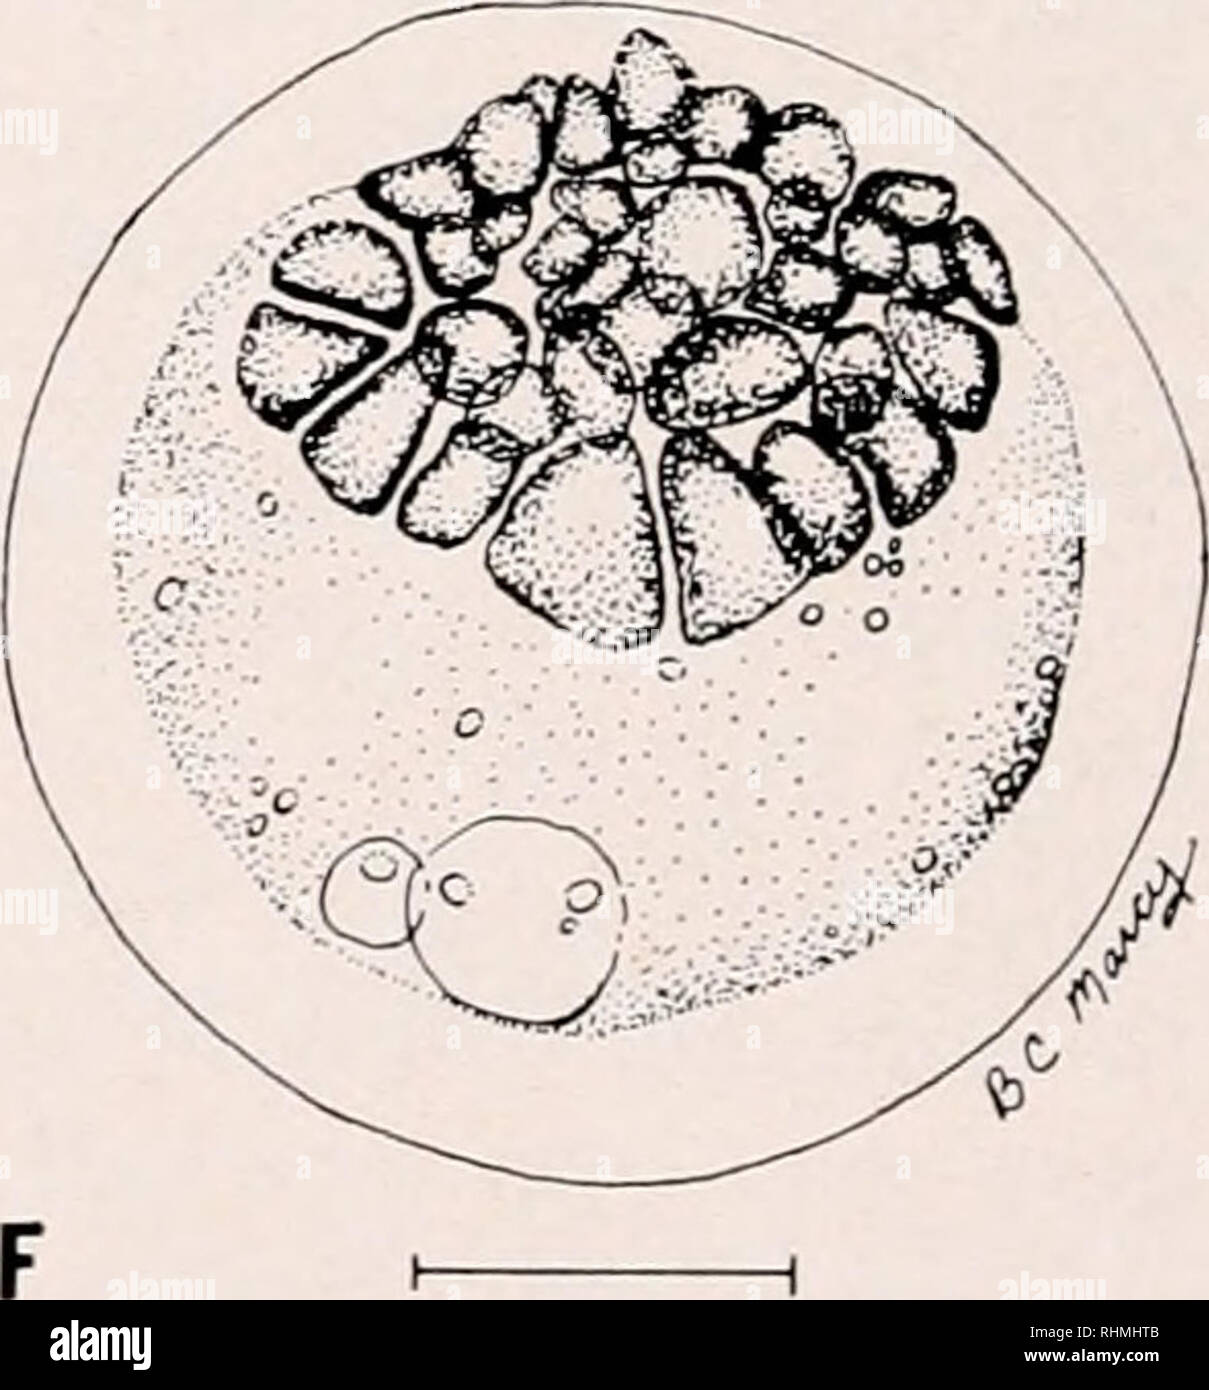 . The Biological bulletin. Biology; Zoology; Biology; Marine Biology. FIGURE 1. Early development of the eggs of the grubby, Myoxoccphalus acnaeus, arti- ficially propagated in the laboratory: A) unfertilized water-hardened egg, 1.58 mm; B) fertilized egg, 1.59 mm, two-cell stage (12 hr, 20 min) ; C) 4-cell stage, 1.60 mm (15 hr, ) min); D) 8-cell stage, 1.61 mm (16 hr, 55 min); E) 16-cell stage, 1.54 mm (21 hr, 10 min) ; F) 32-cell stage, 1.60 mm (27 hr, 40 min), scale = 0.5 mm. Measurements refer to mean egg capsule diameters.. Please note that these images are extracted from scanned page im Stock Photo